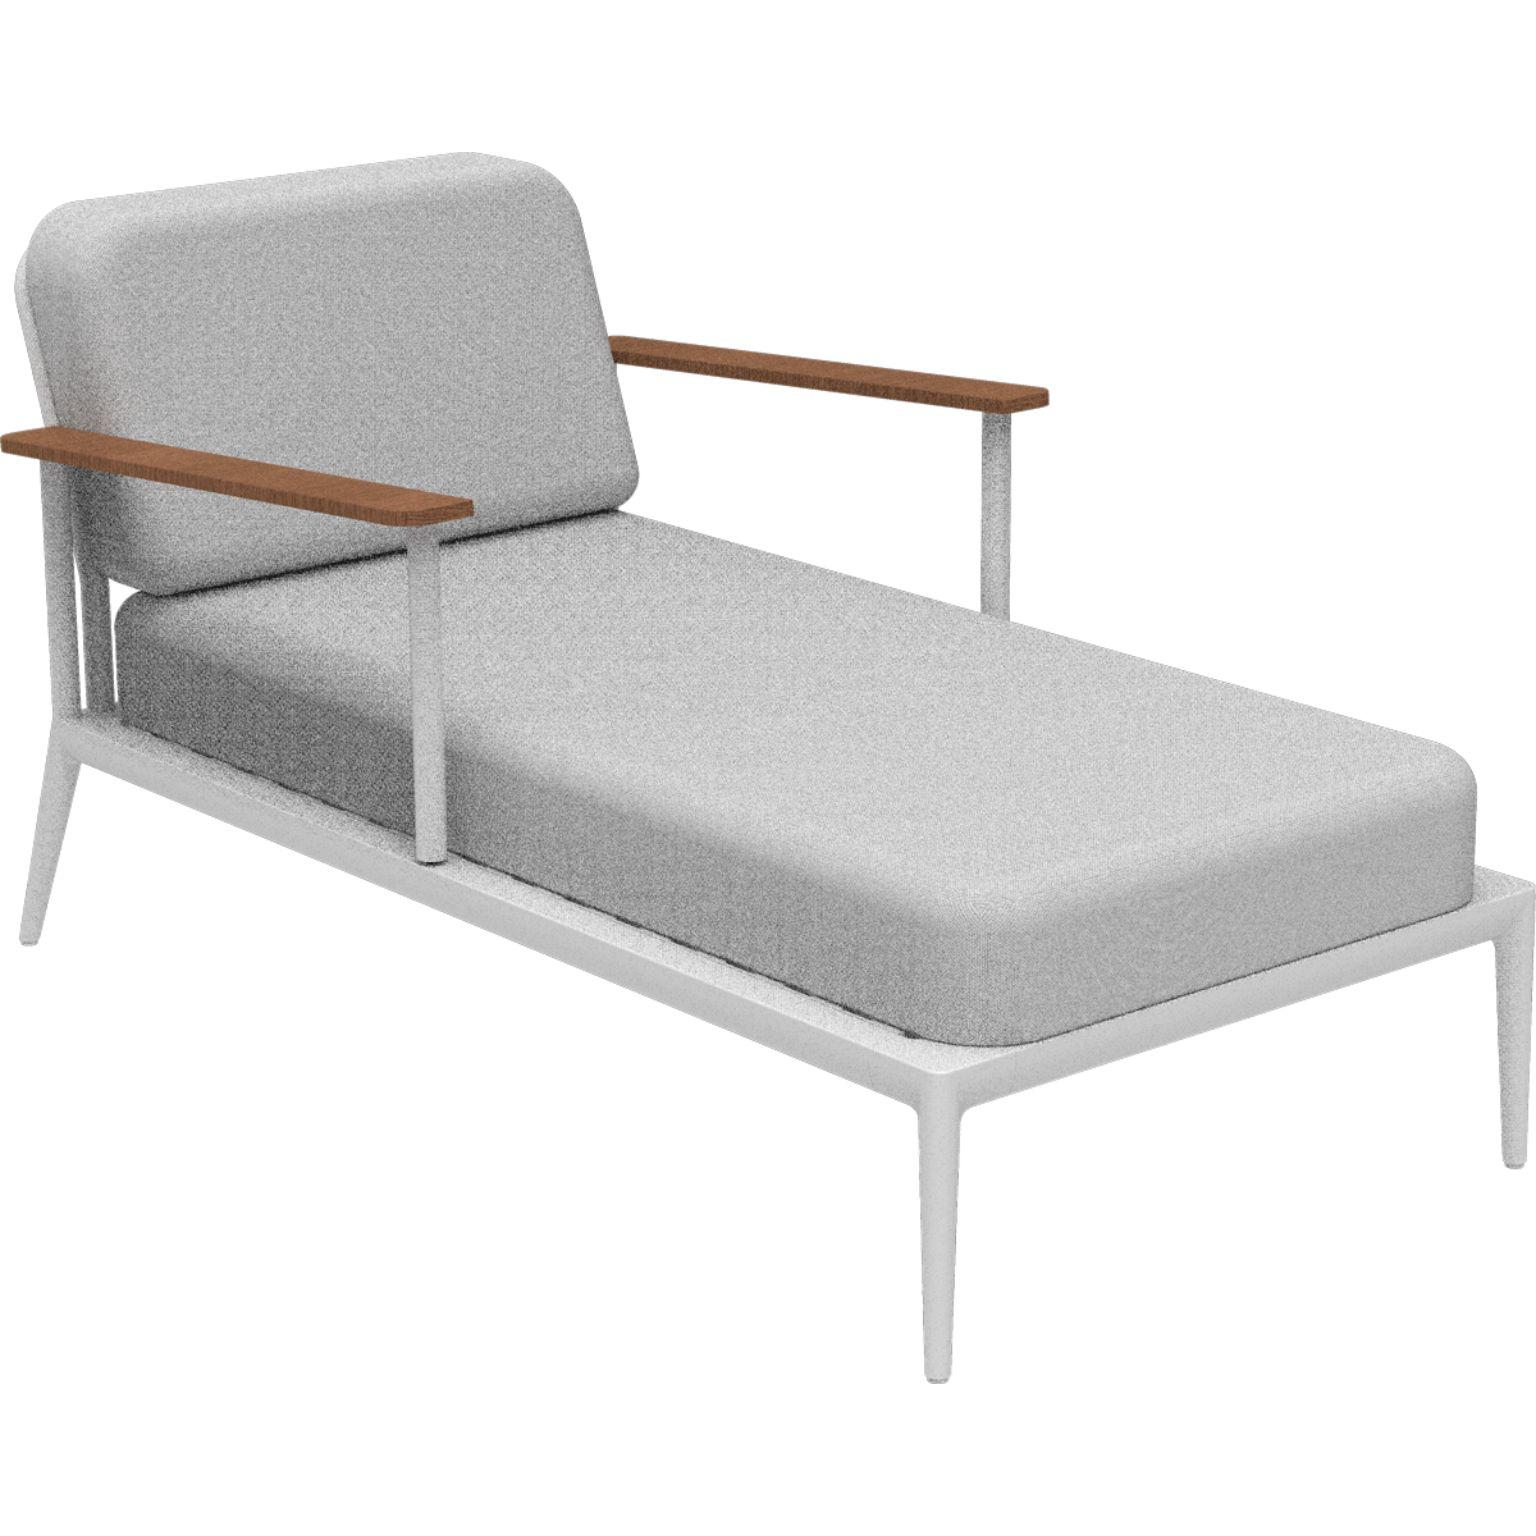 Nature White Divan by MOWEE
Dimensions: D155 x W83 x H81 cm (seat height 42 cm).
Material: Aluminum, upholstery and Iroko wood.
Weight: 30 kg.
Also available in different colors and finishes. Please contact us.

An unmistakable collection for